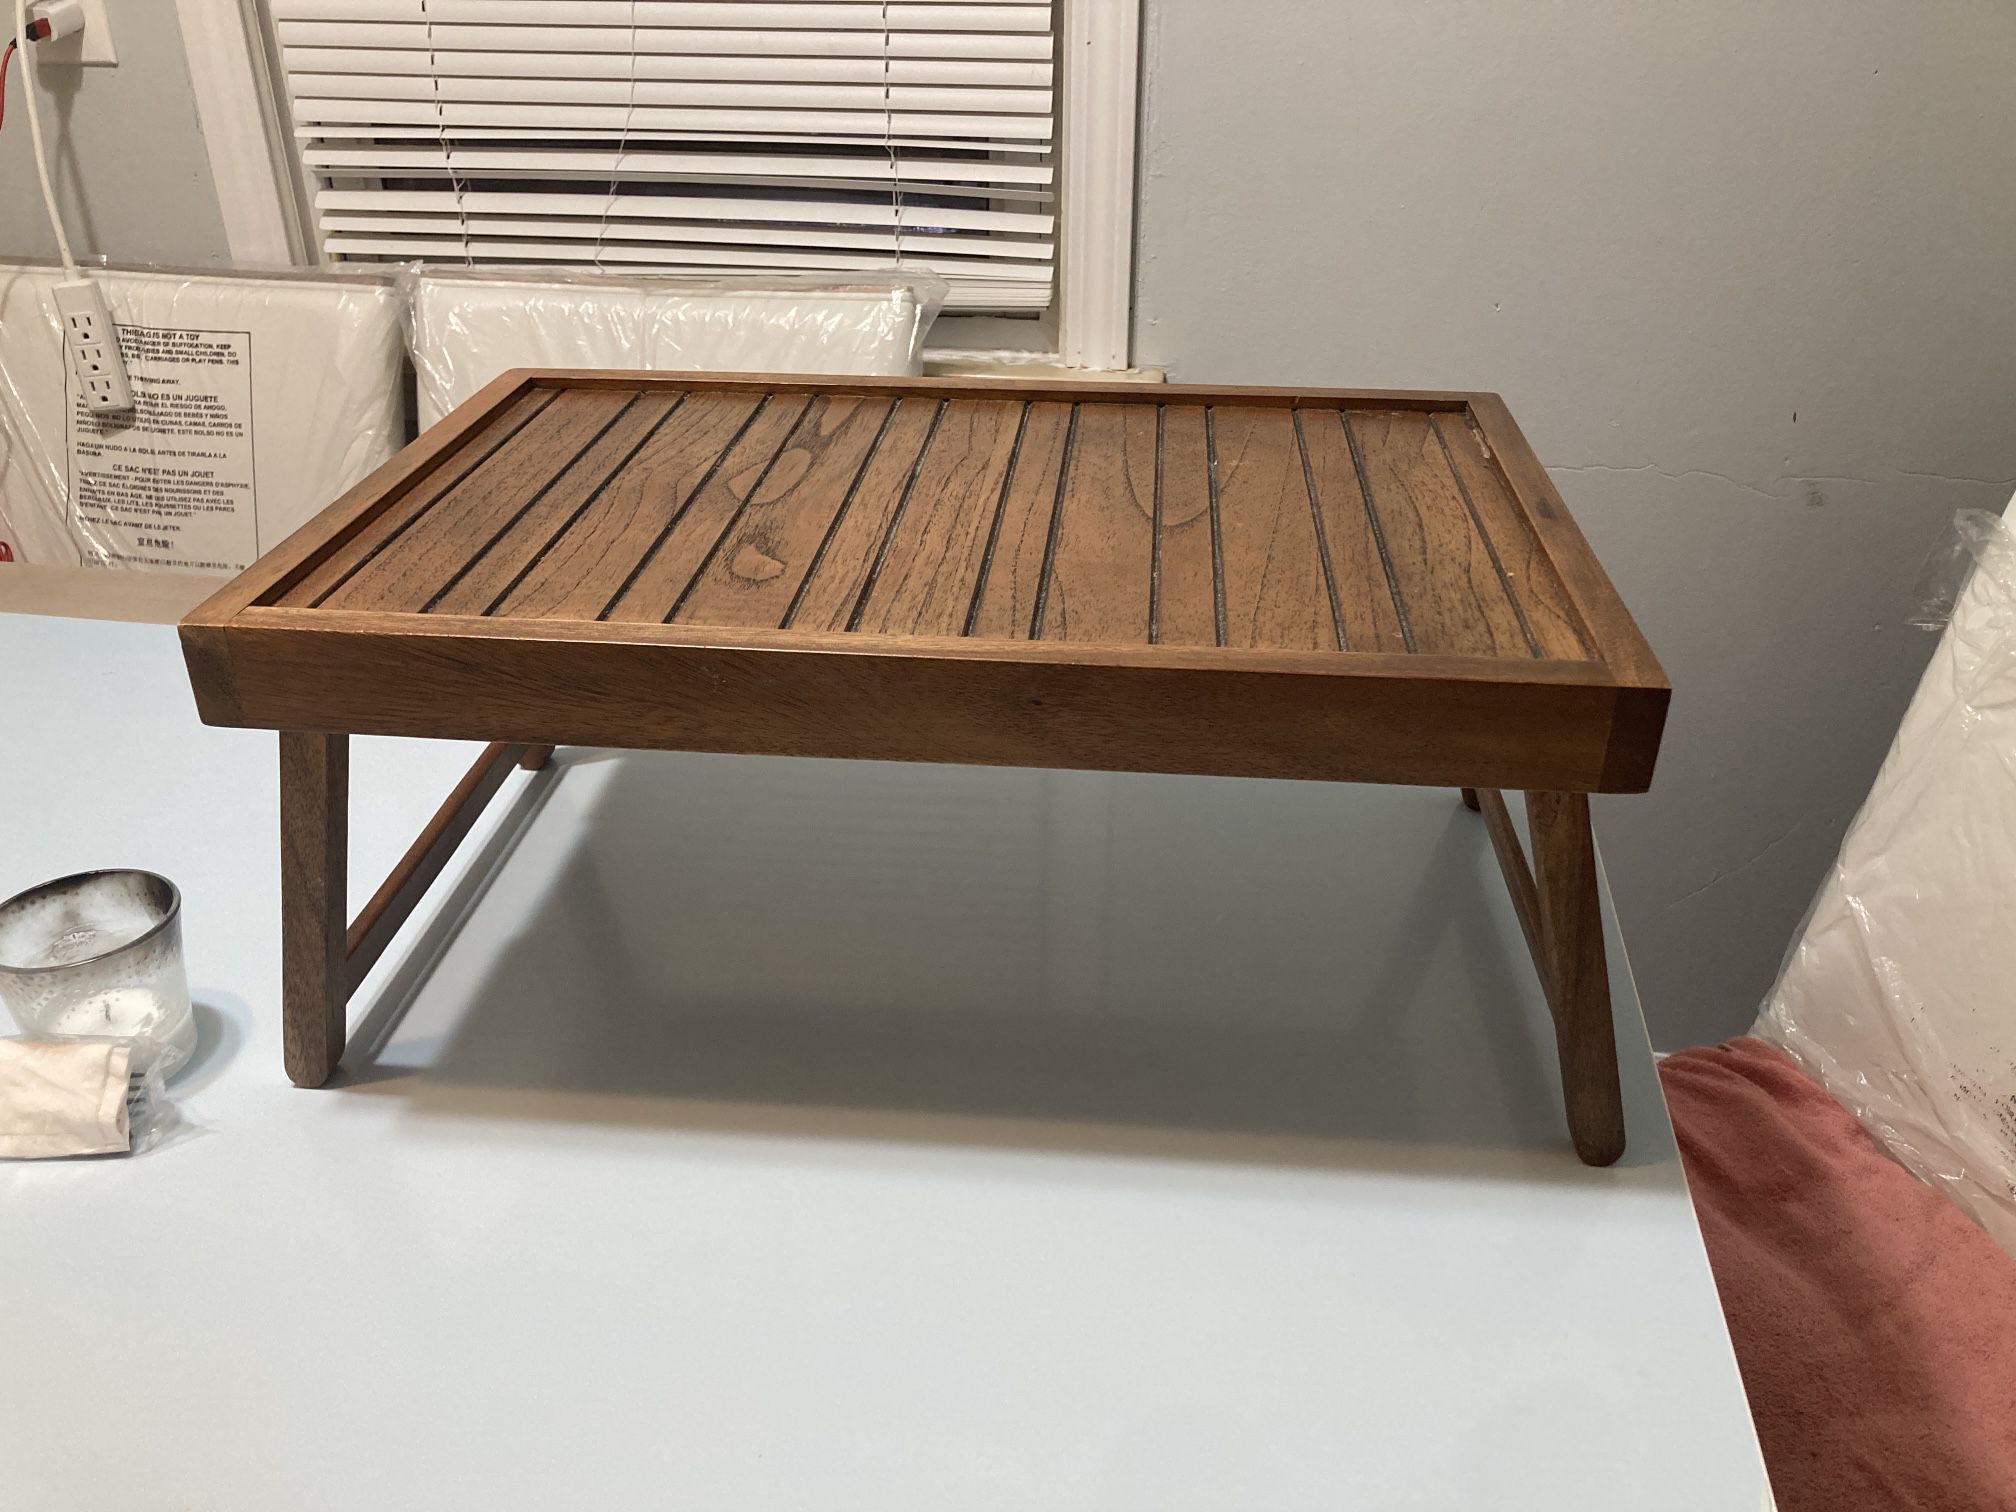 Wooden Trays For Couch or Bedroom